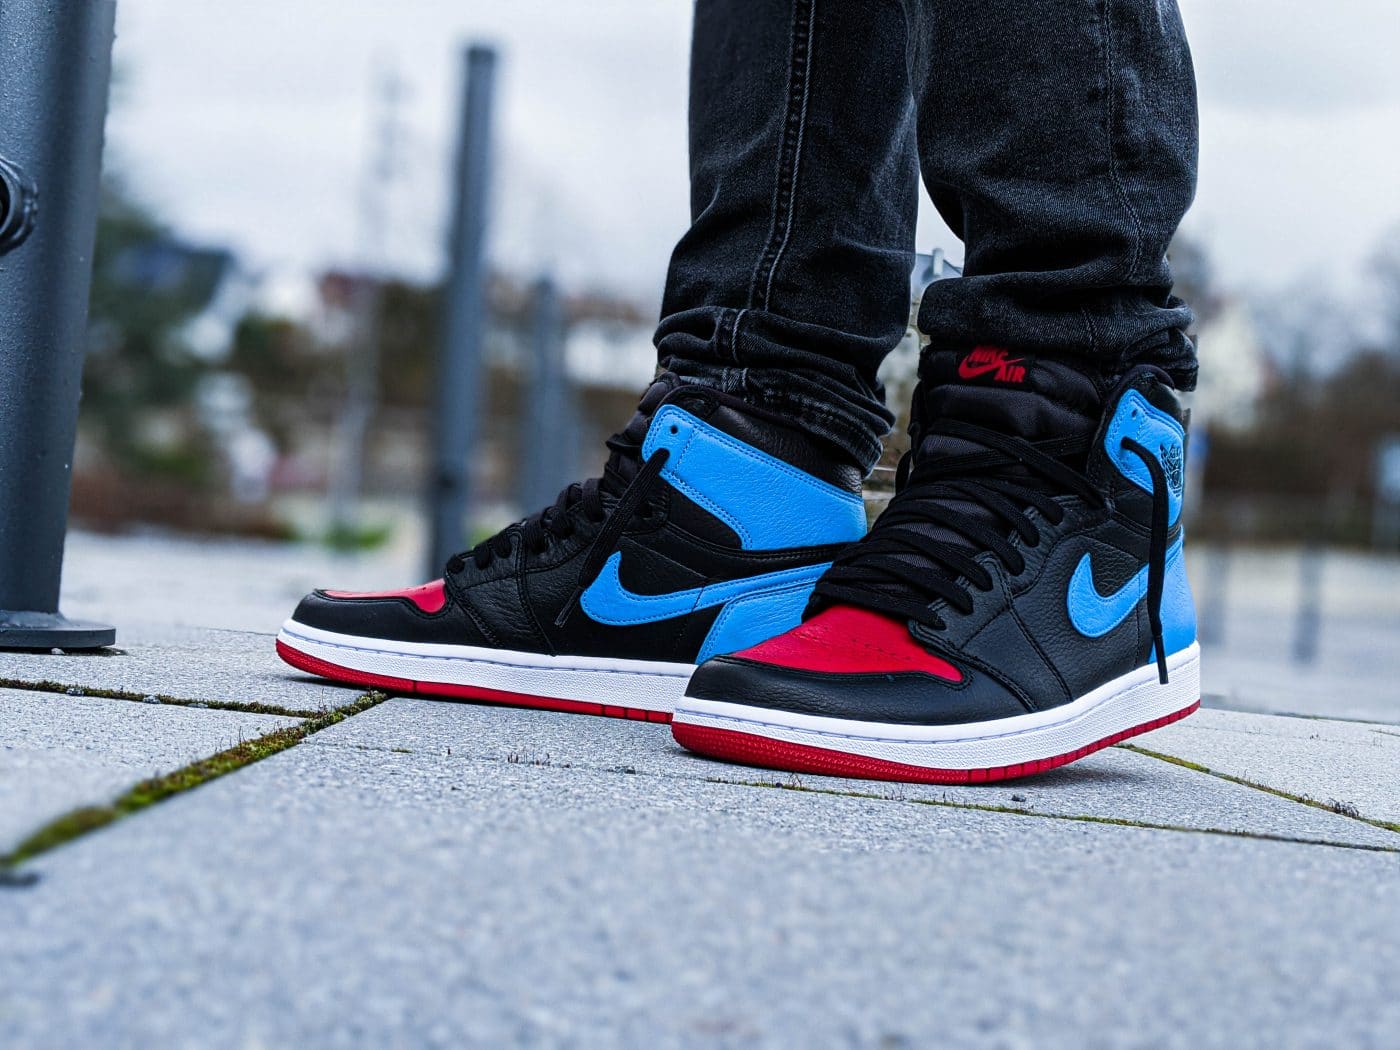 large Reorganize trial Latest Pickup: Air Jordan 1 High OG "UNC to Chicago" | Grailify